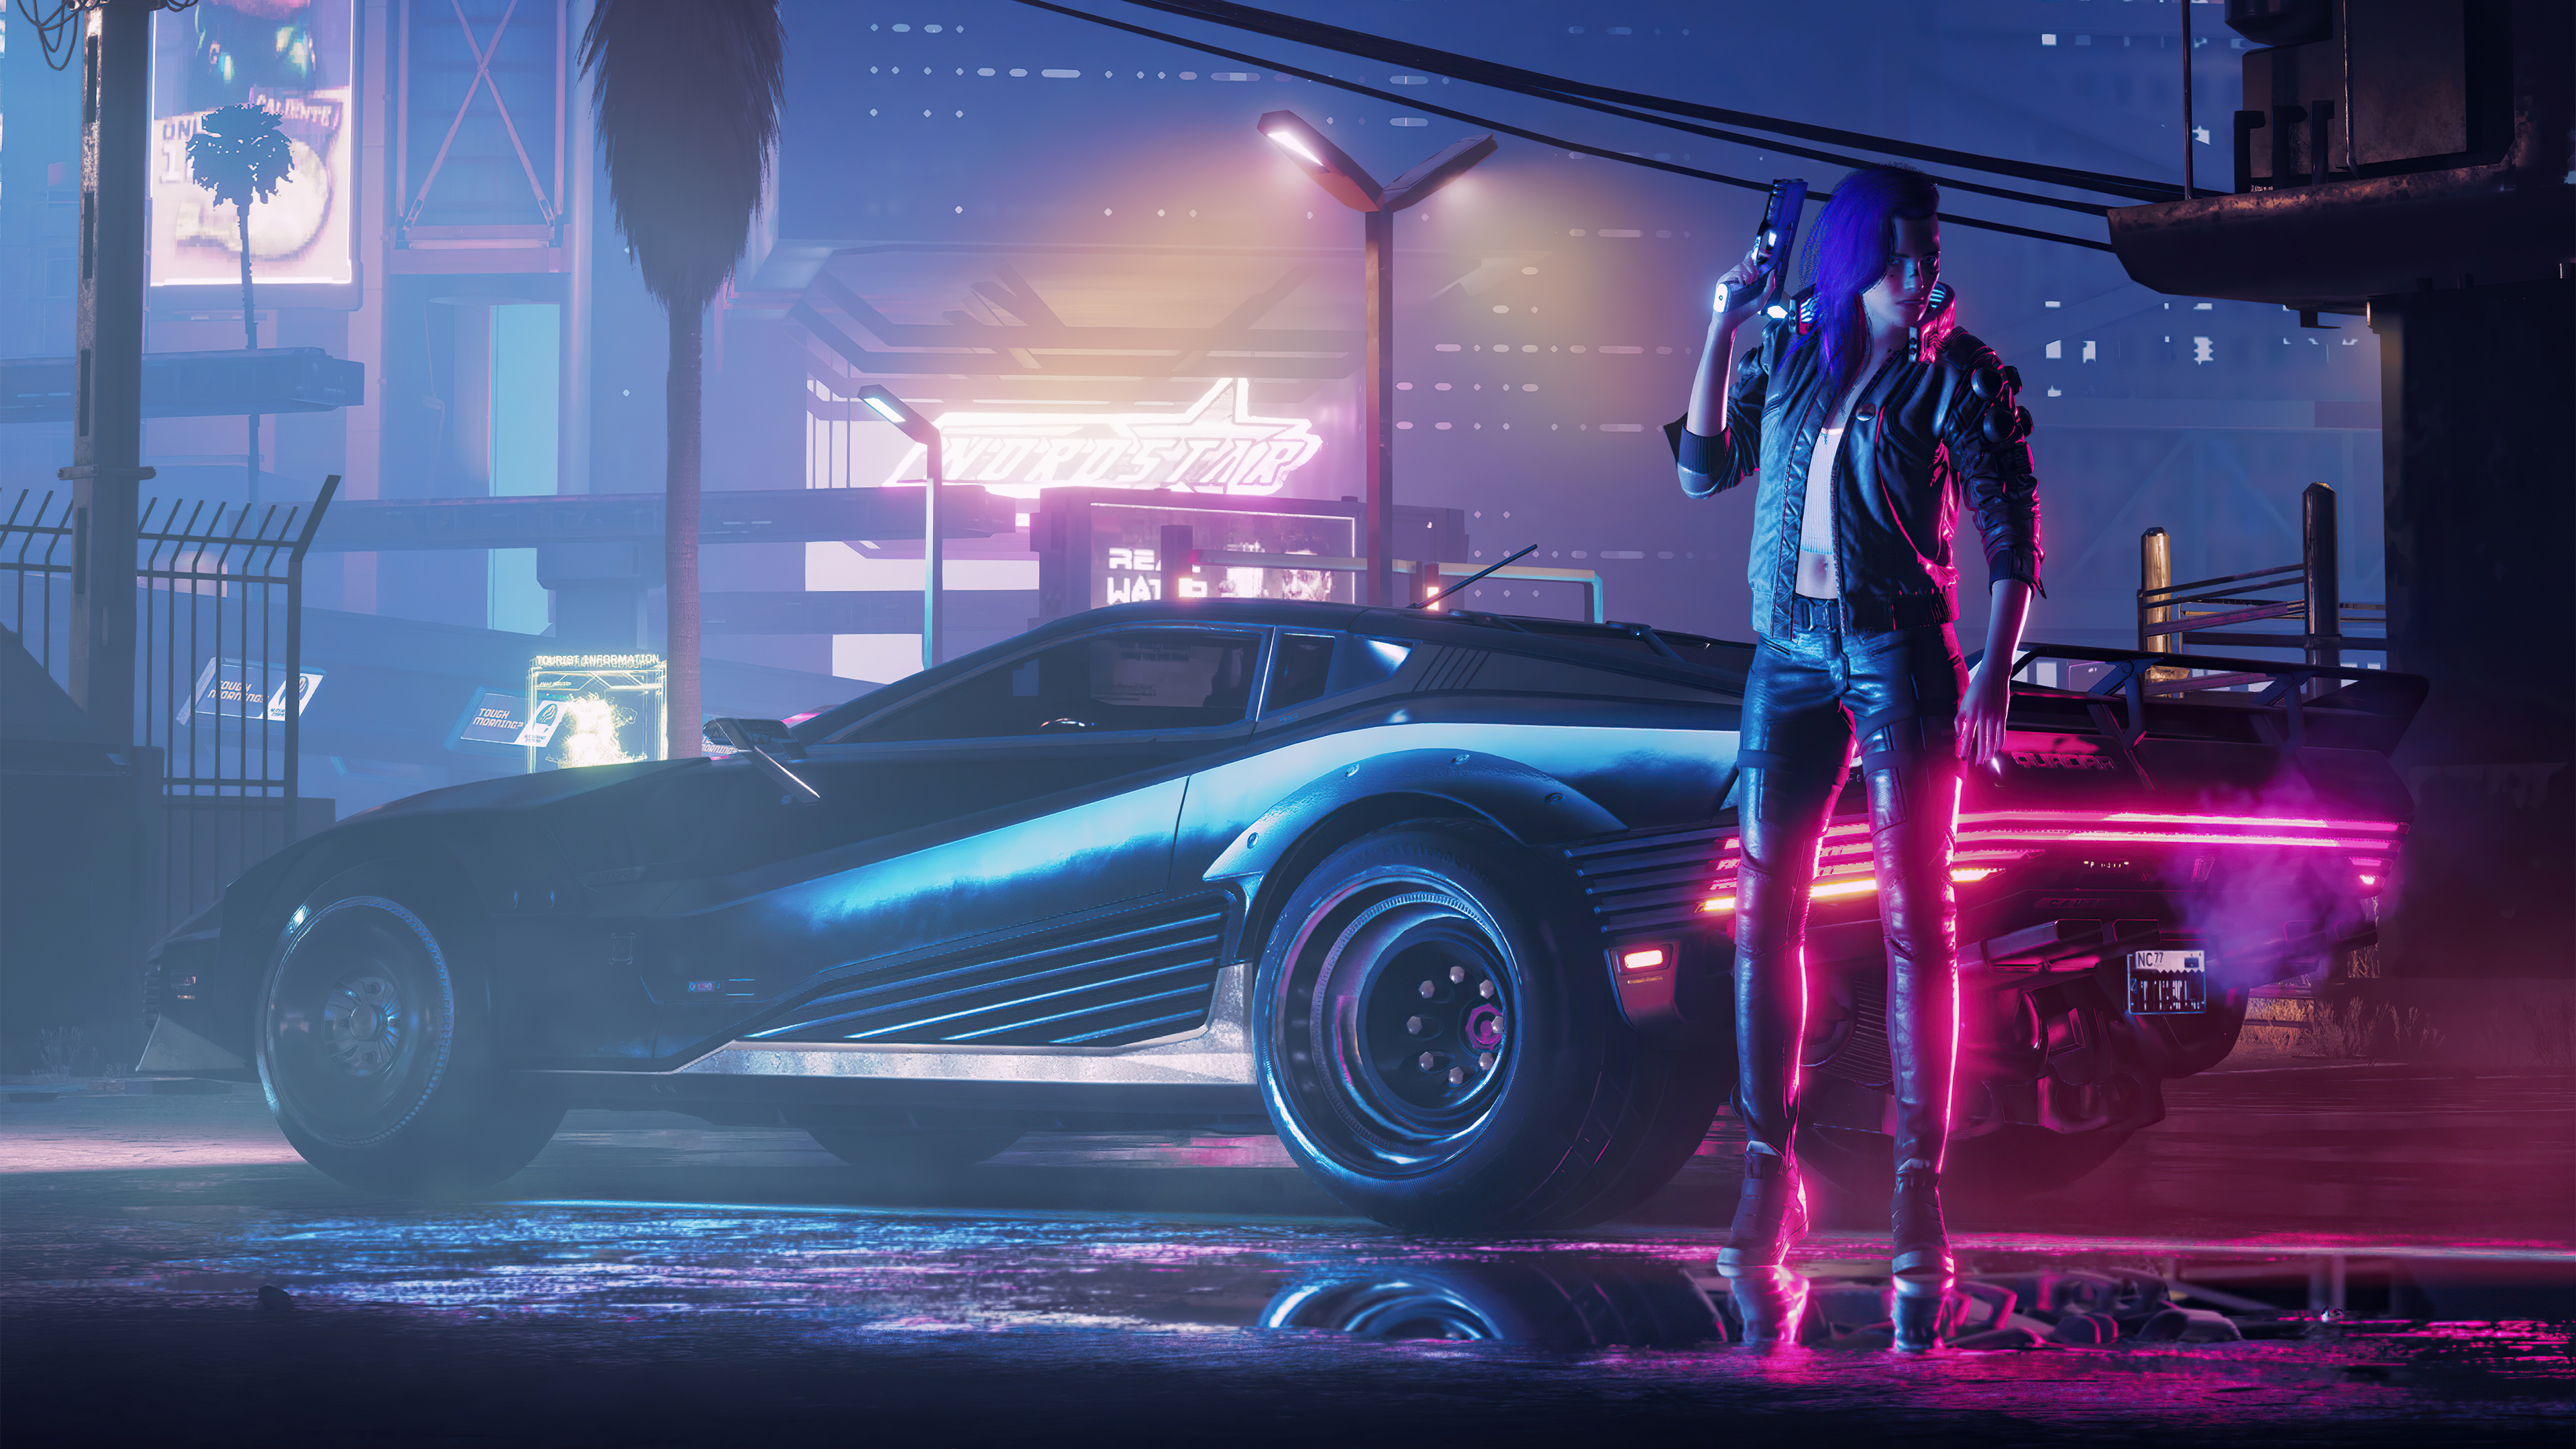 Cyberpunk 2077 Neon City 4k Wallpaper,HD Games Wallpapers,4k Wallpapers ,Images,Backgrounds,Photos and Pictures